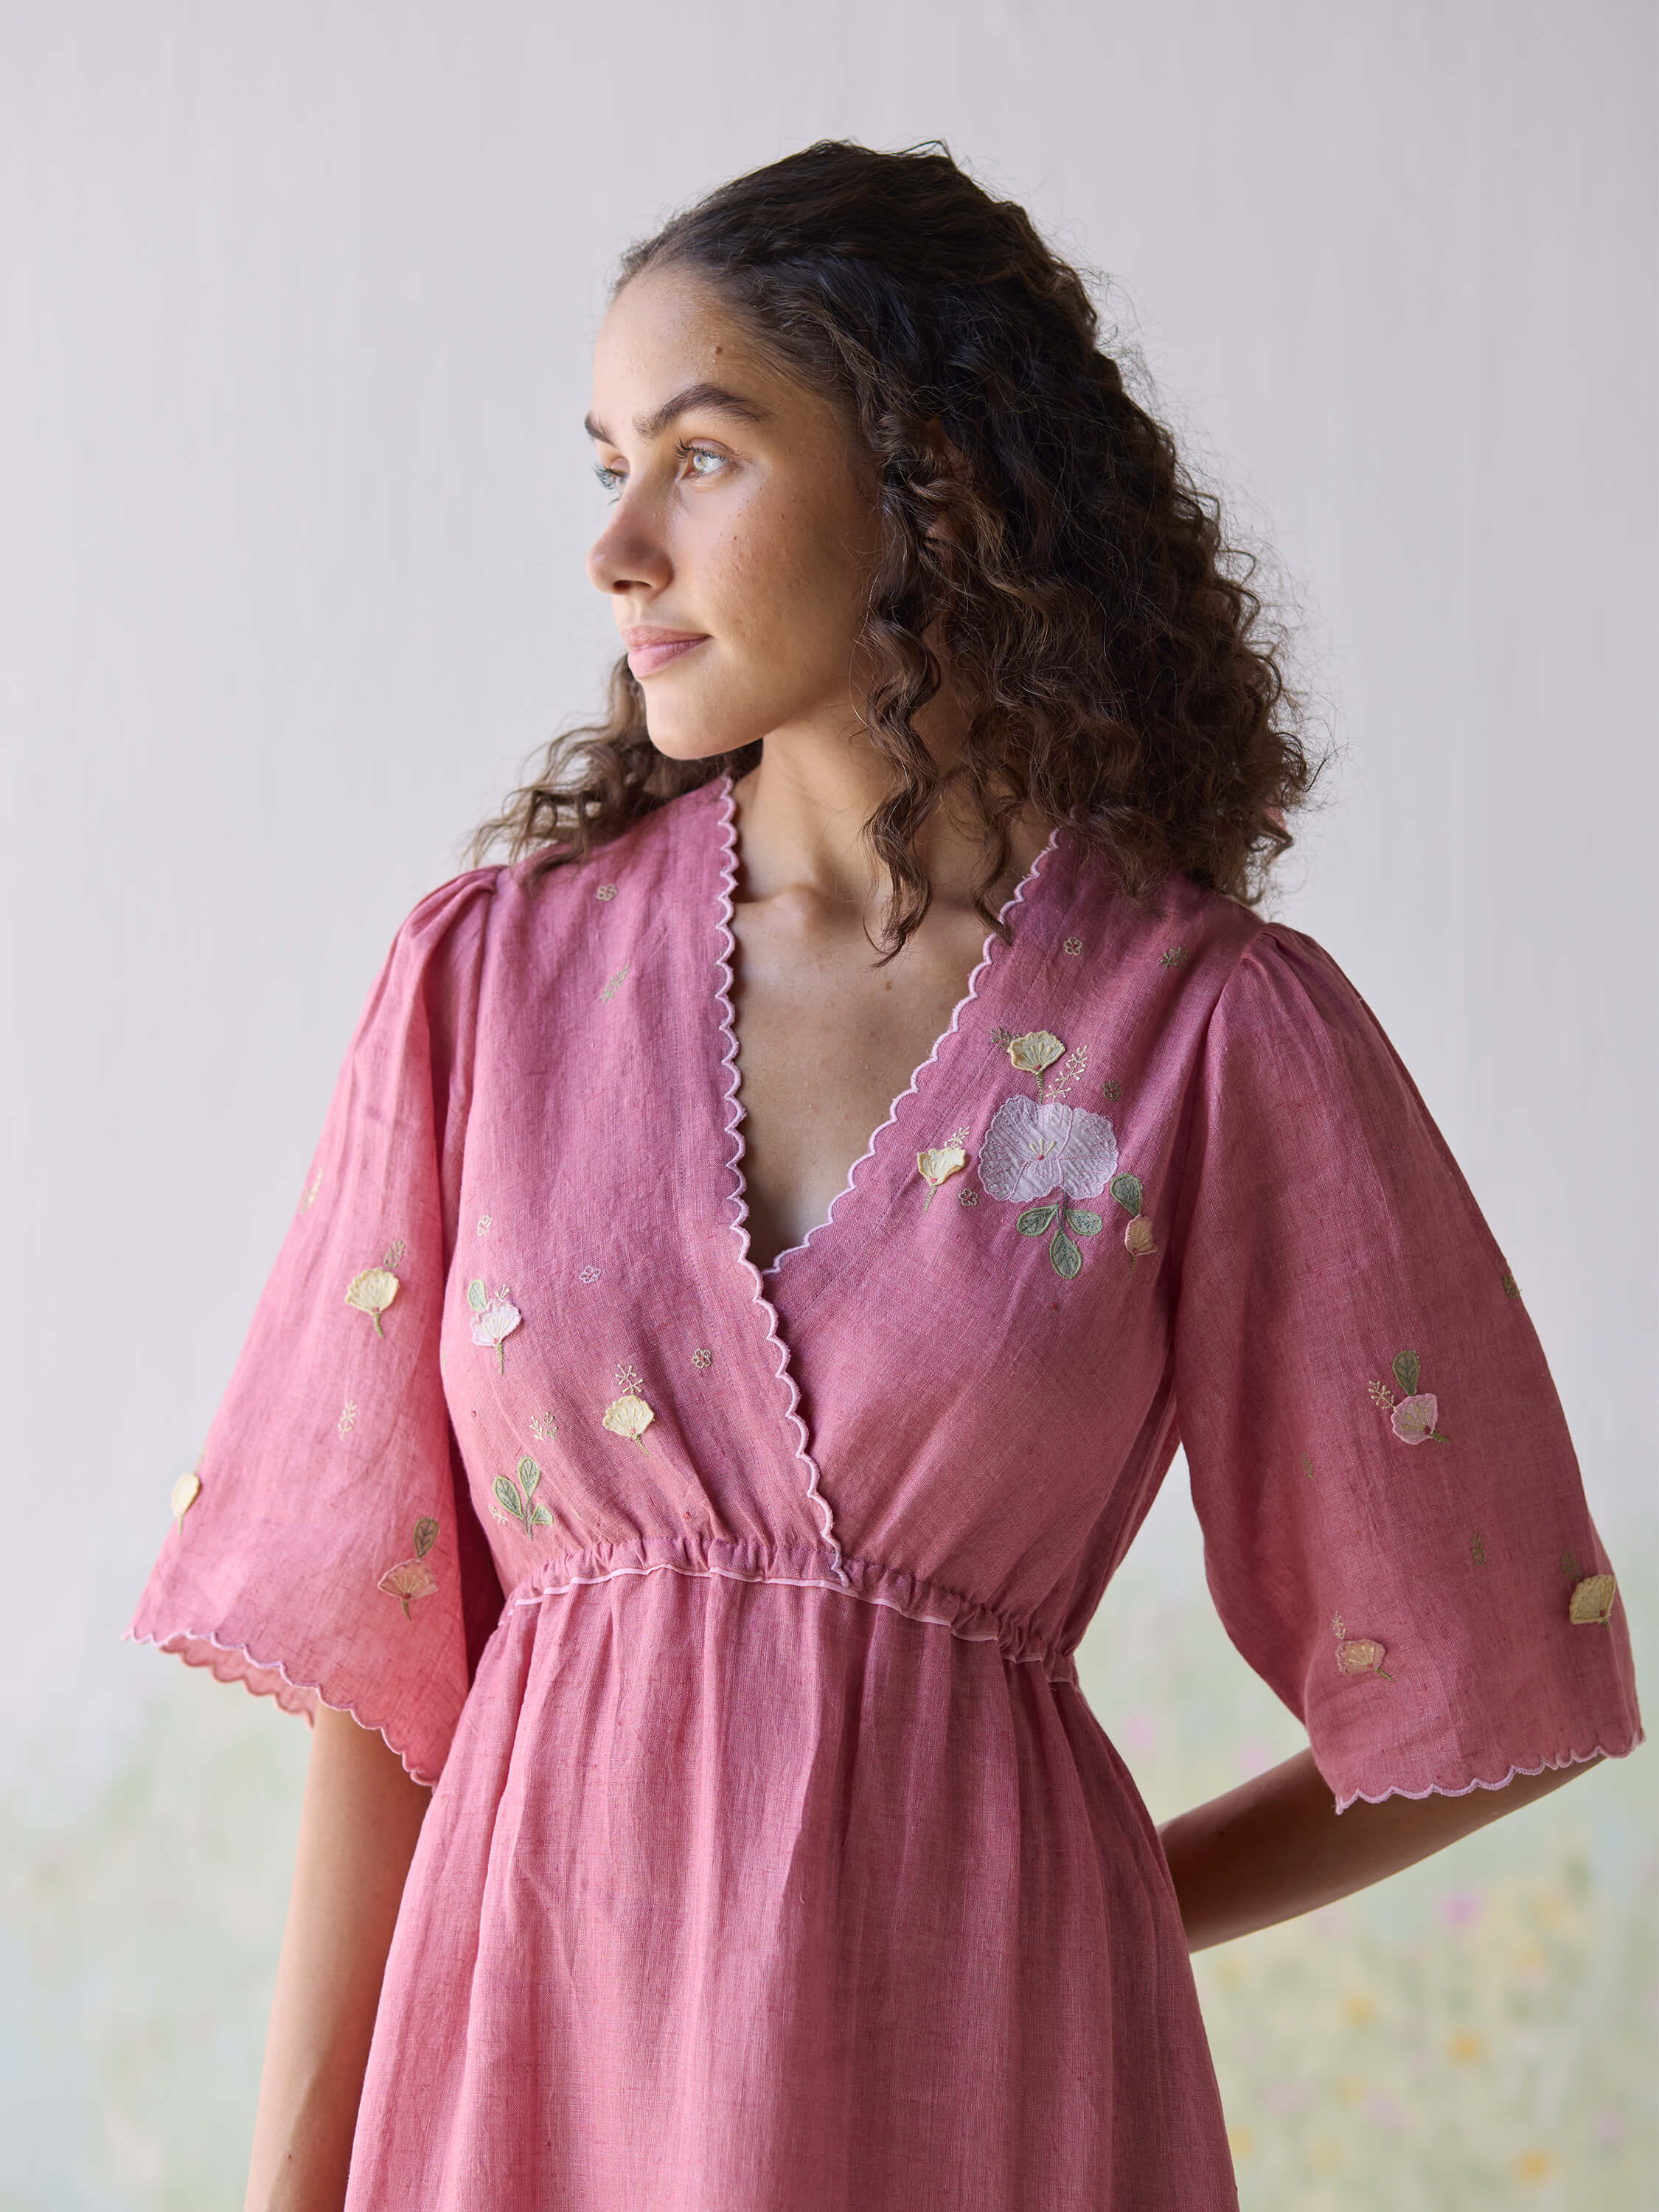 Woman wearing pink embroidered dress looking into the distance.